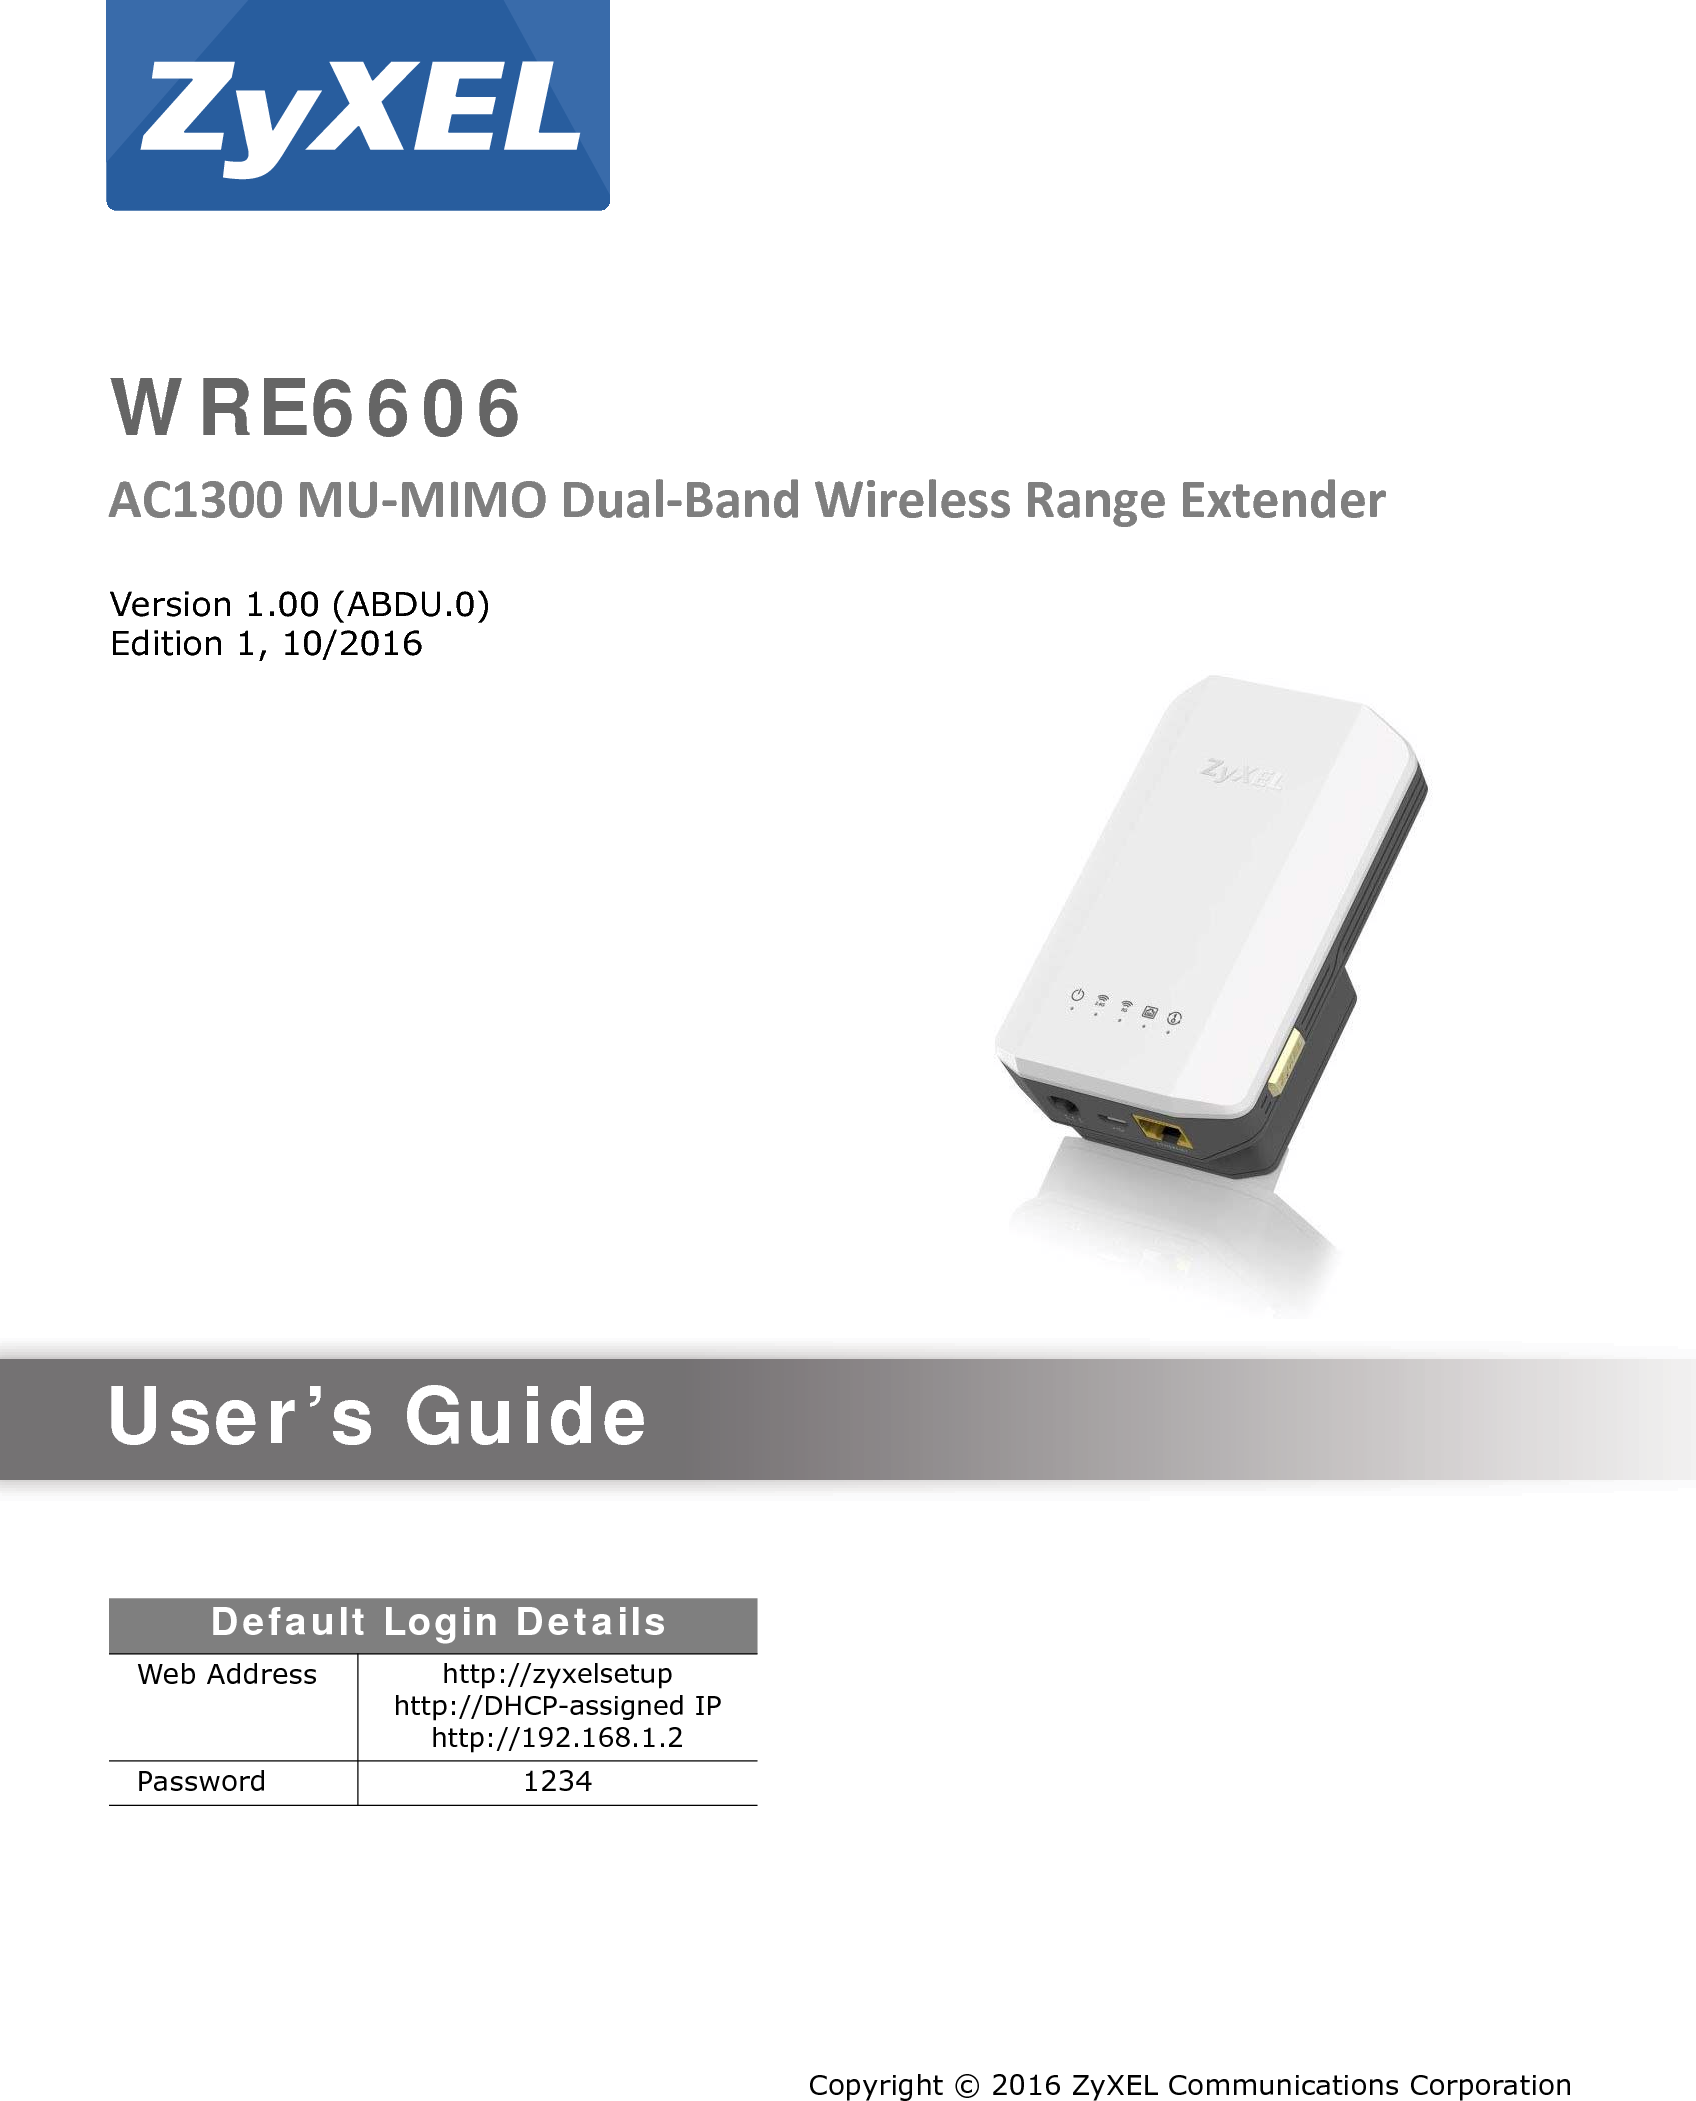 Quick Start Guidewww.zyxel.comWRE6606Dual-Band Wireless AC1300 Access PointVersion 1.00 (ABDU.0)Edition 1, 10/2016Copyright © 2016 ZyXEL Communications CorporationUser’s GuideDefault Login DetailsWeb Address http://zyxelsetuphttp://DHCP-assigned IPhttp://192.168.1.2Password 1234AC1300 MU-MIMO Dual-Band Wireless Range Extender    